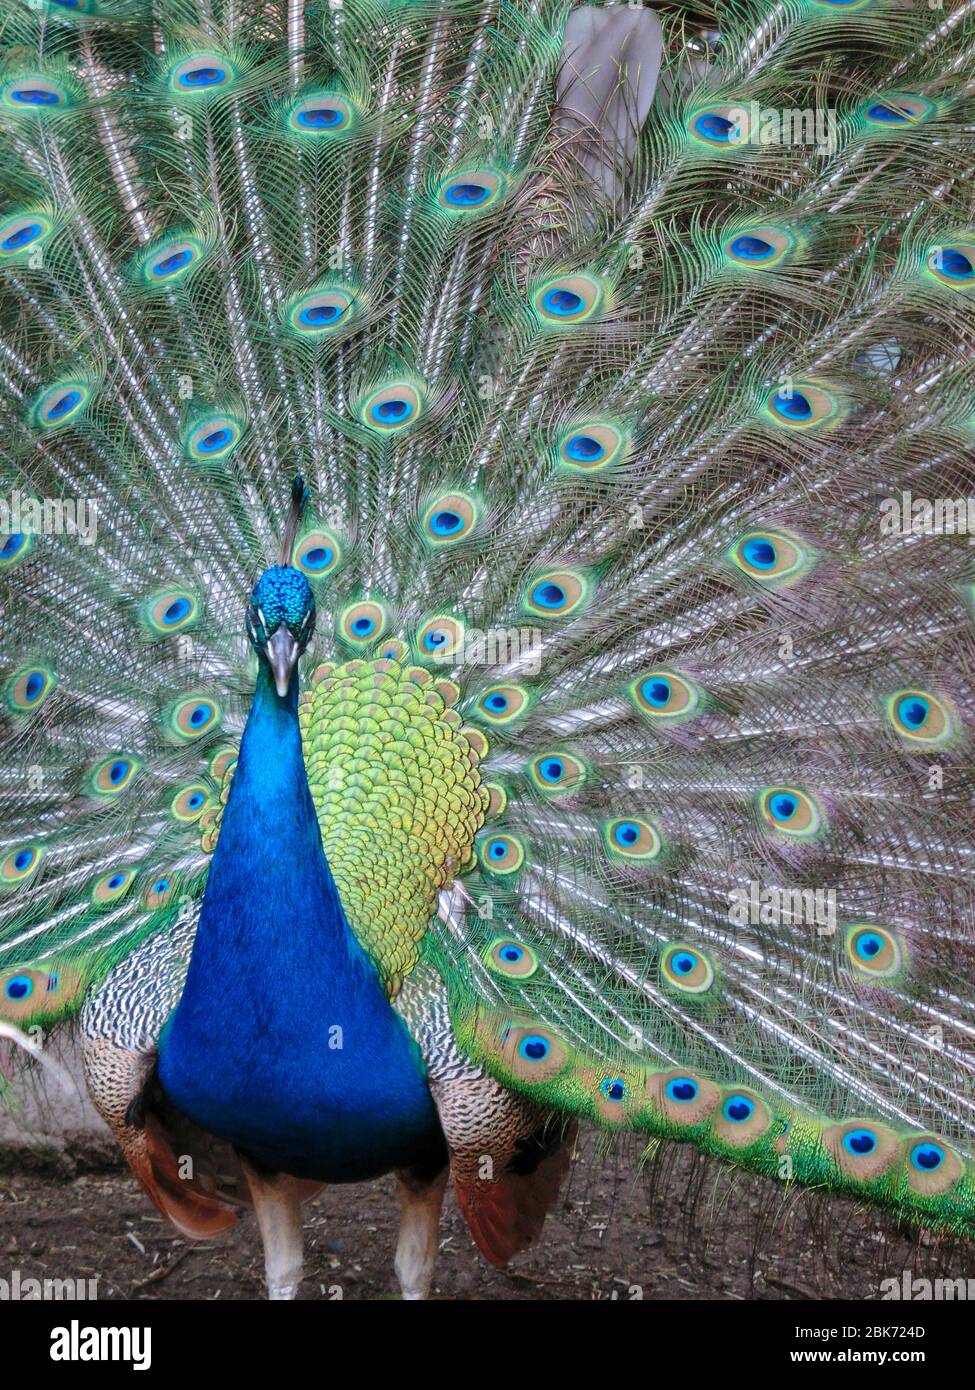 Closeup of a Peacock with open feathers Stock Photo - Alamy